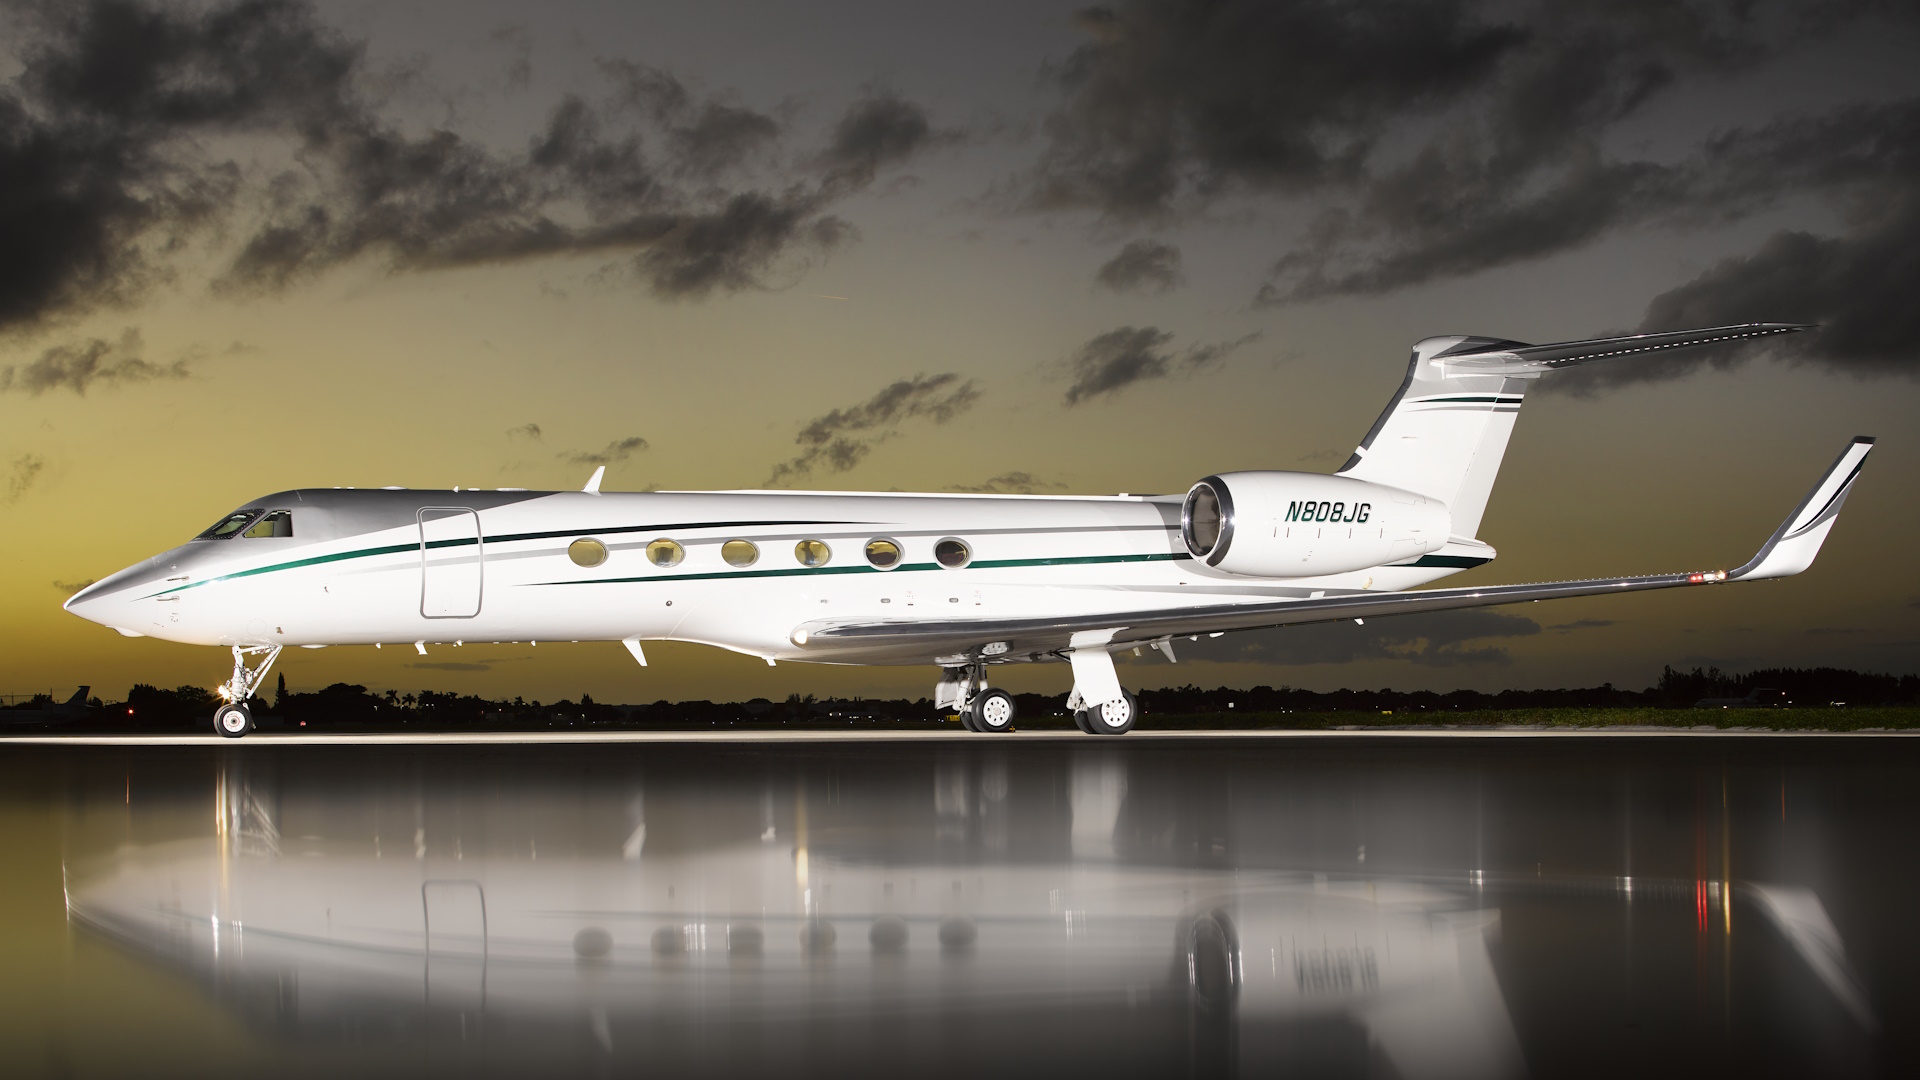 Alerion Gulfstream V - N808JG available for private charter by Alerion Aviation.